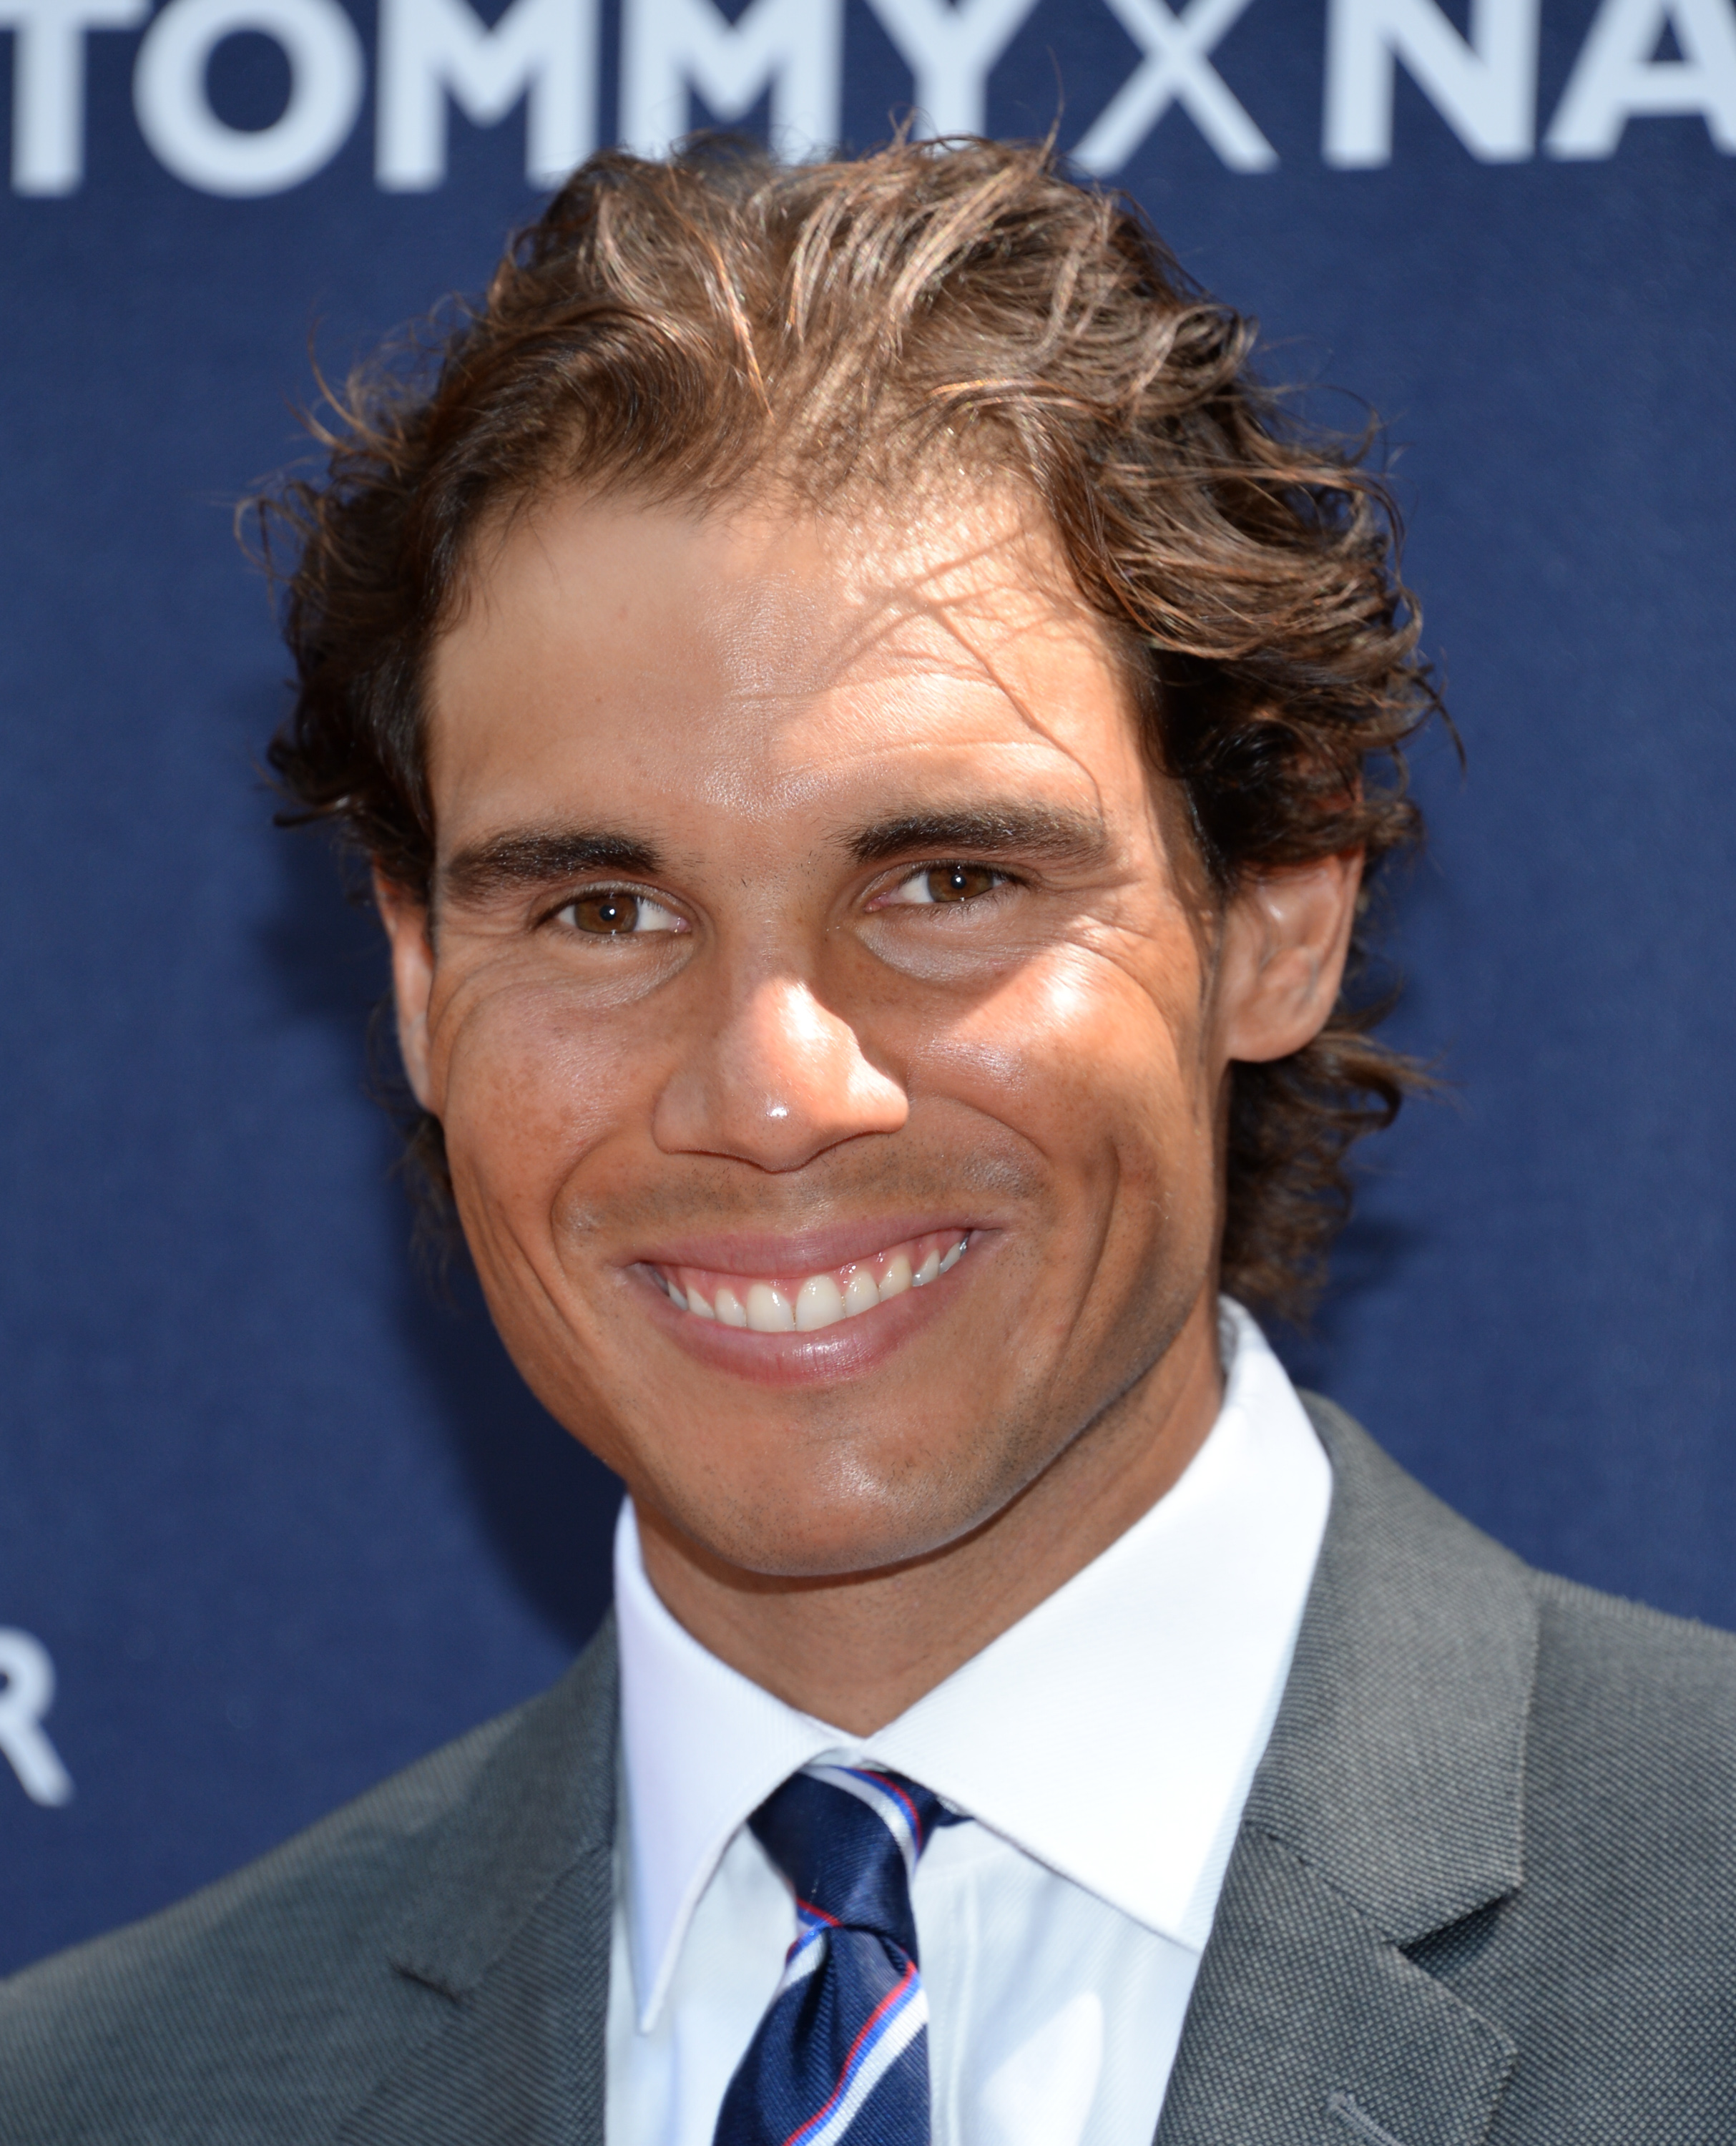 Rafael Nadal unveils his new Tommy Hilfiger campaign in NYC [PHOTOS] – Rafael Nadal Fans2427 x 3000